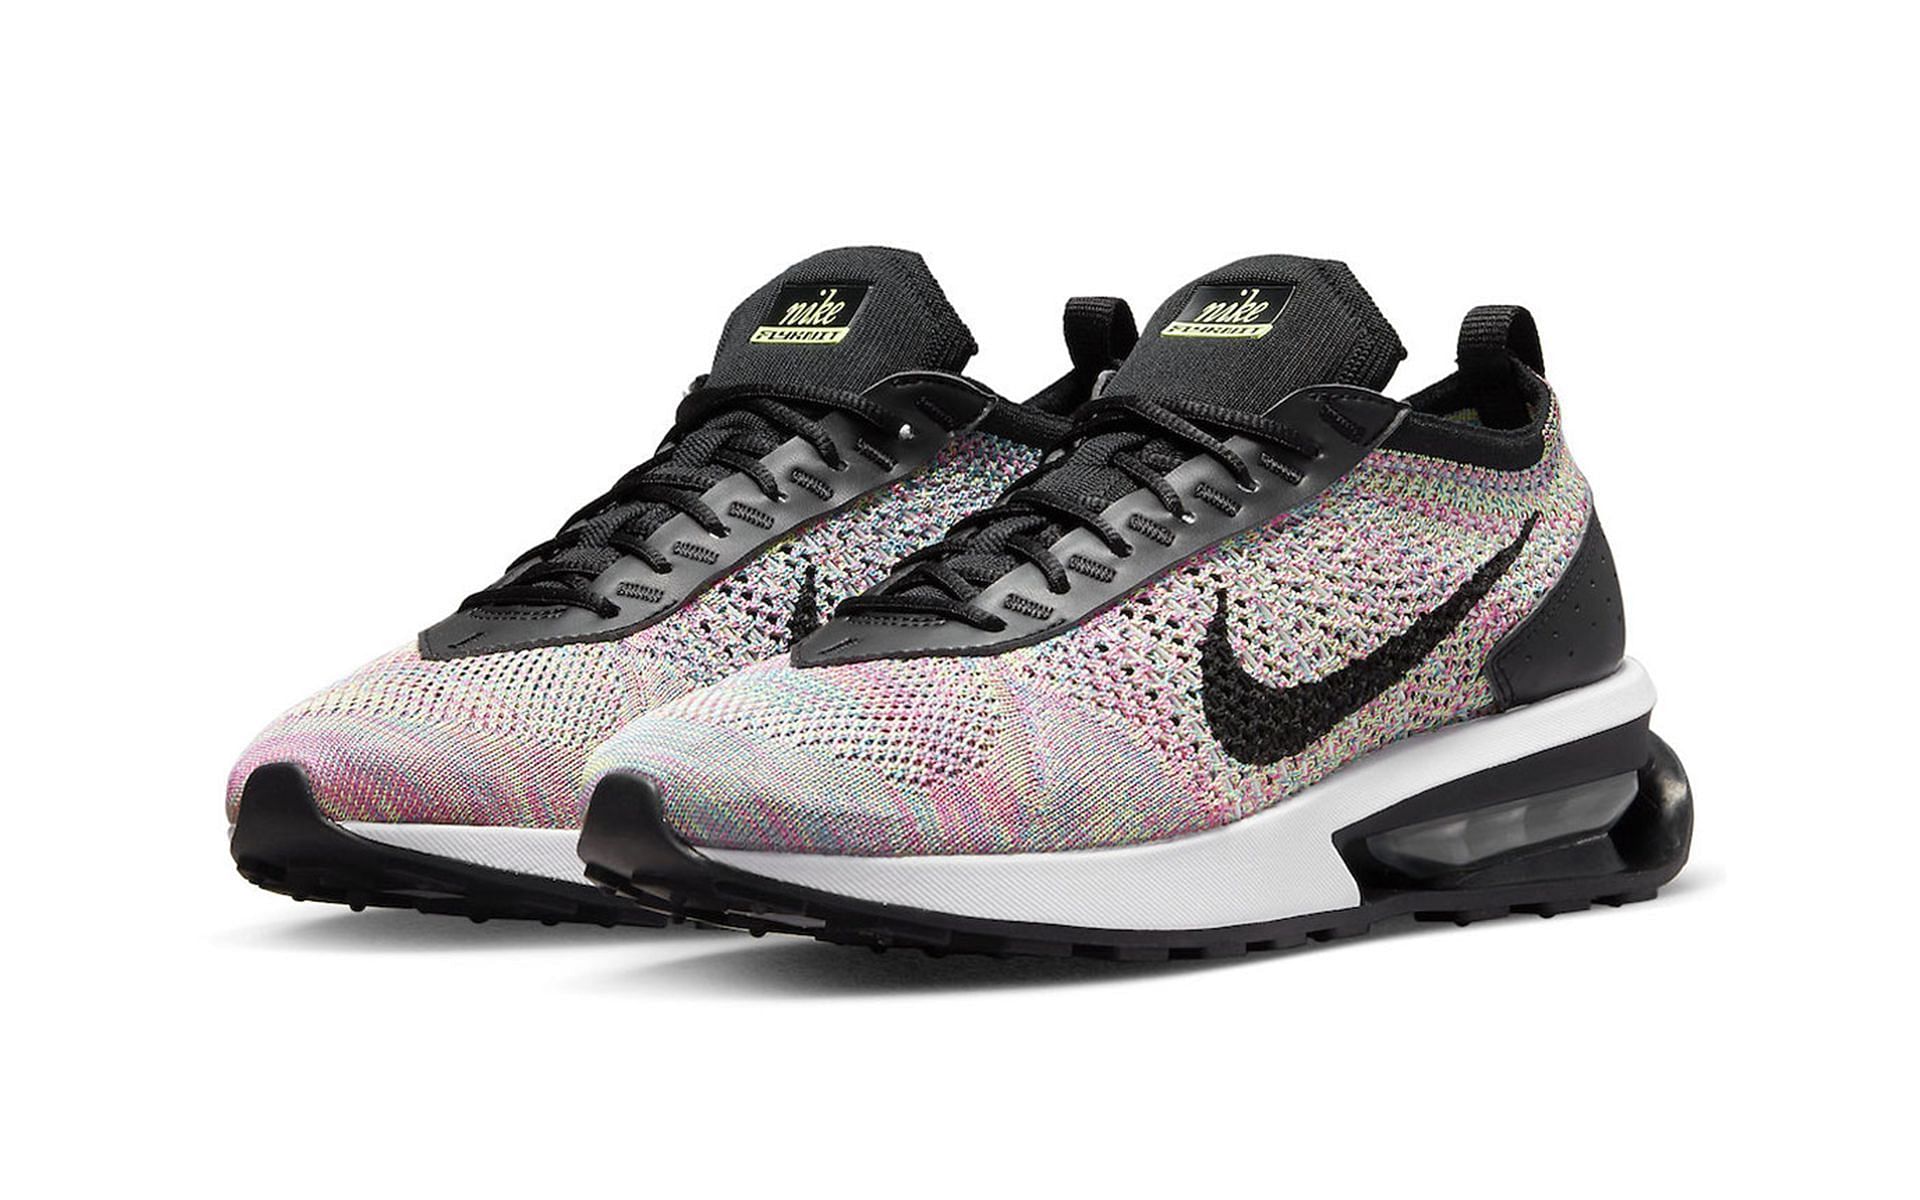 Where to buy Nike Air Max Racer Multicolor shoes Release date, price and details explored